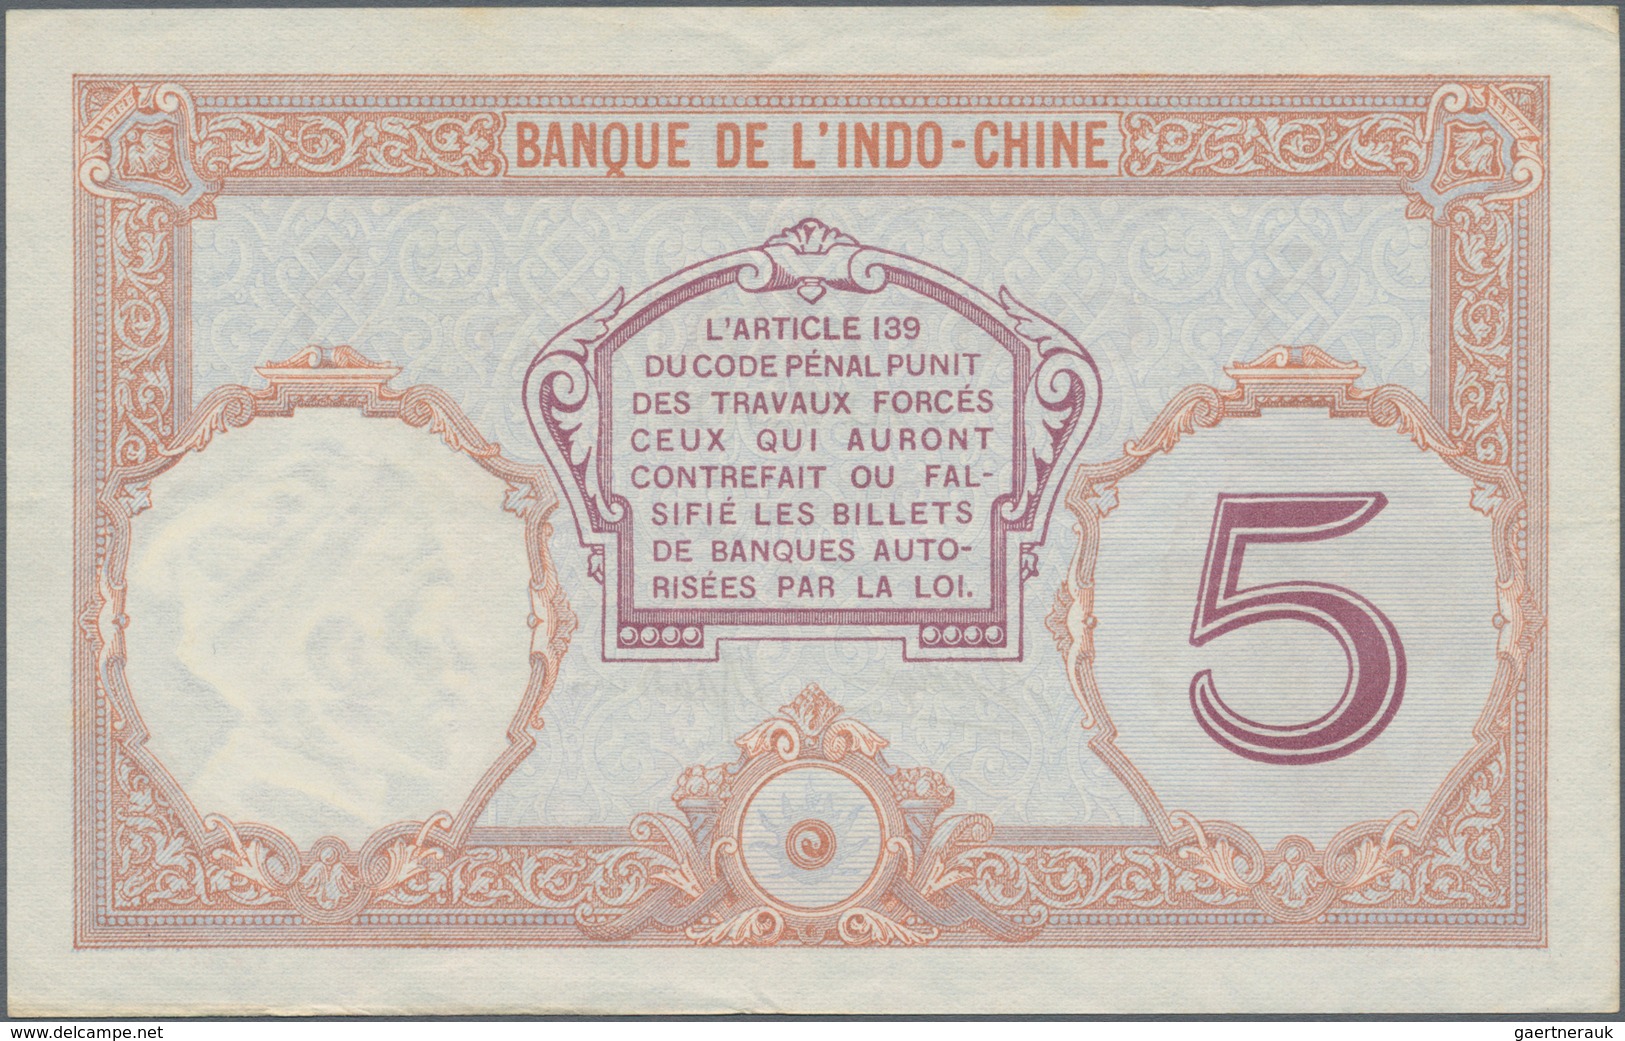 Tahiti: Banque De L'Indochine – Papeete 5 Francs ND(1927), P.11c, Great Condition With Strong Paper - Sonstige – Ozeanien